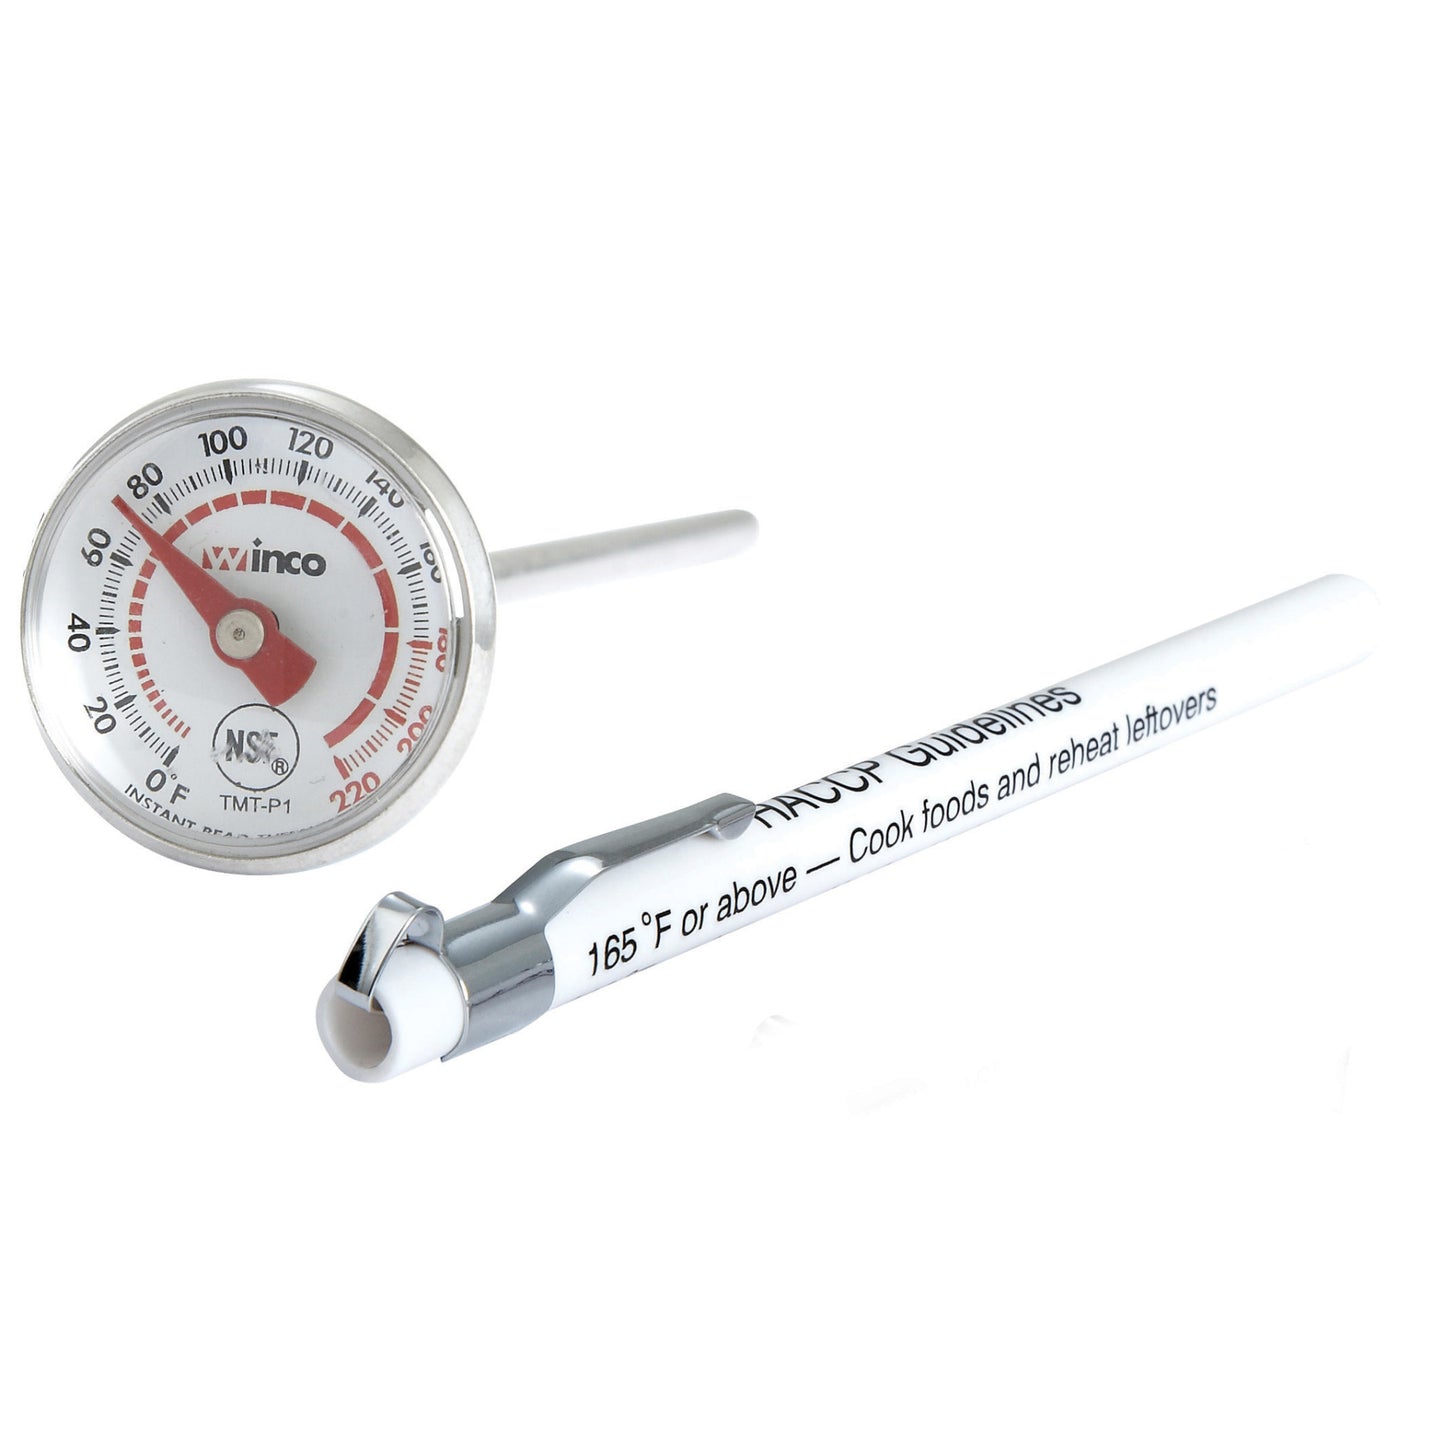 Pocket Test Thermometer - 0 - 220F